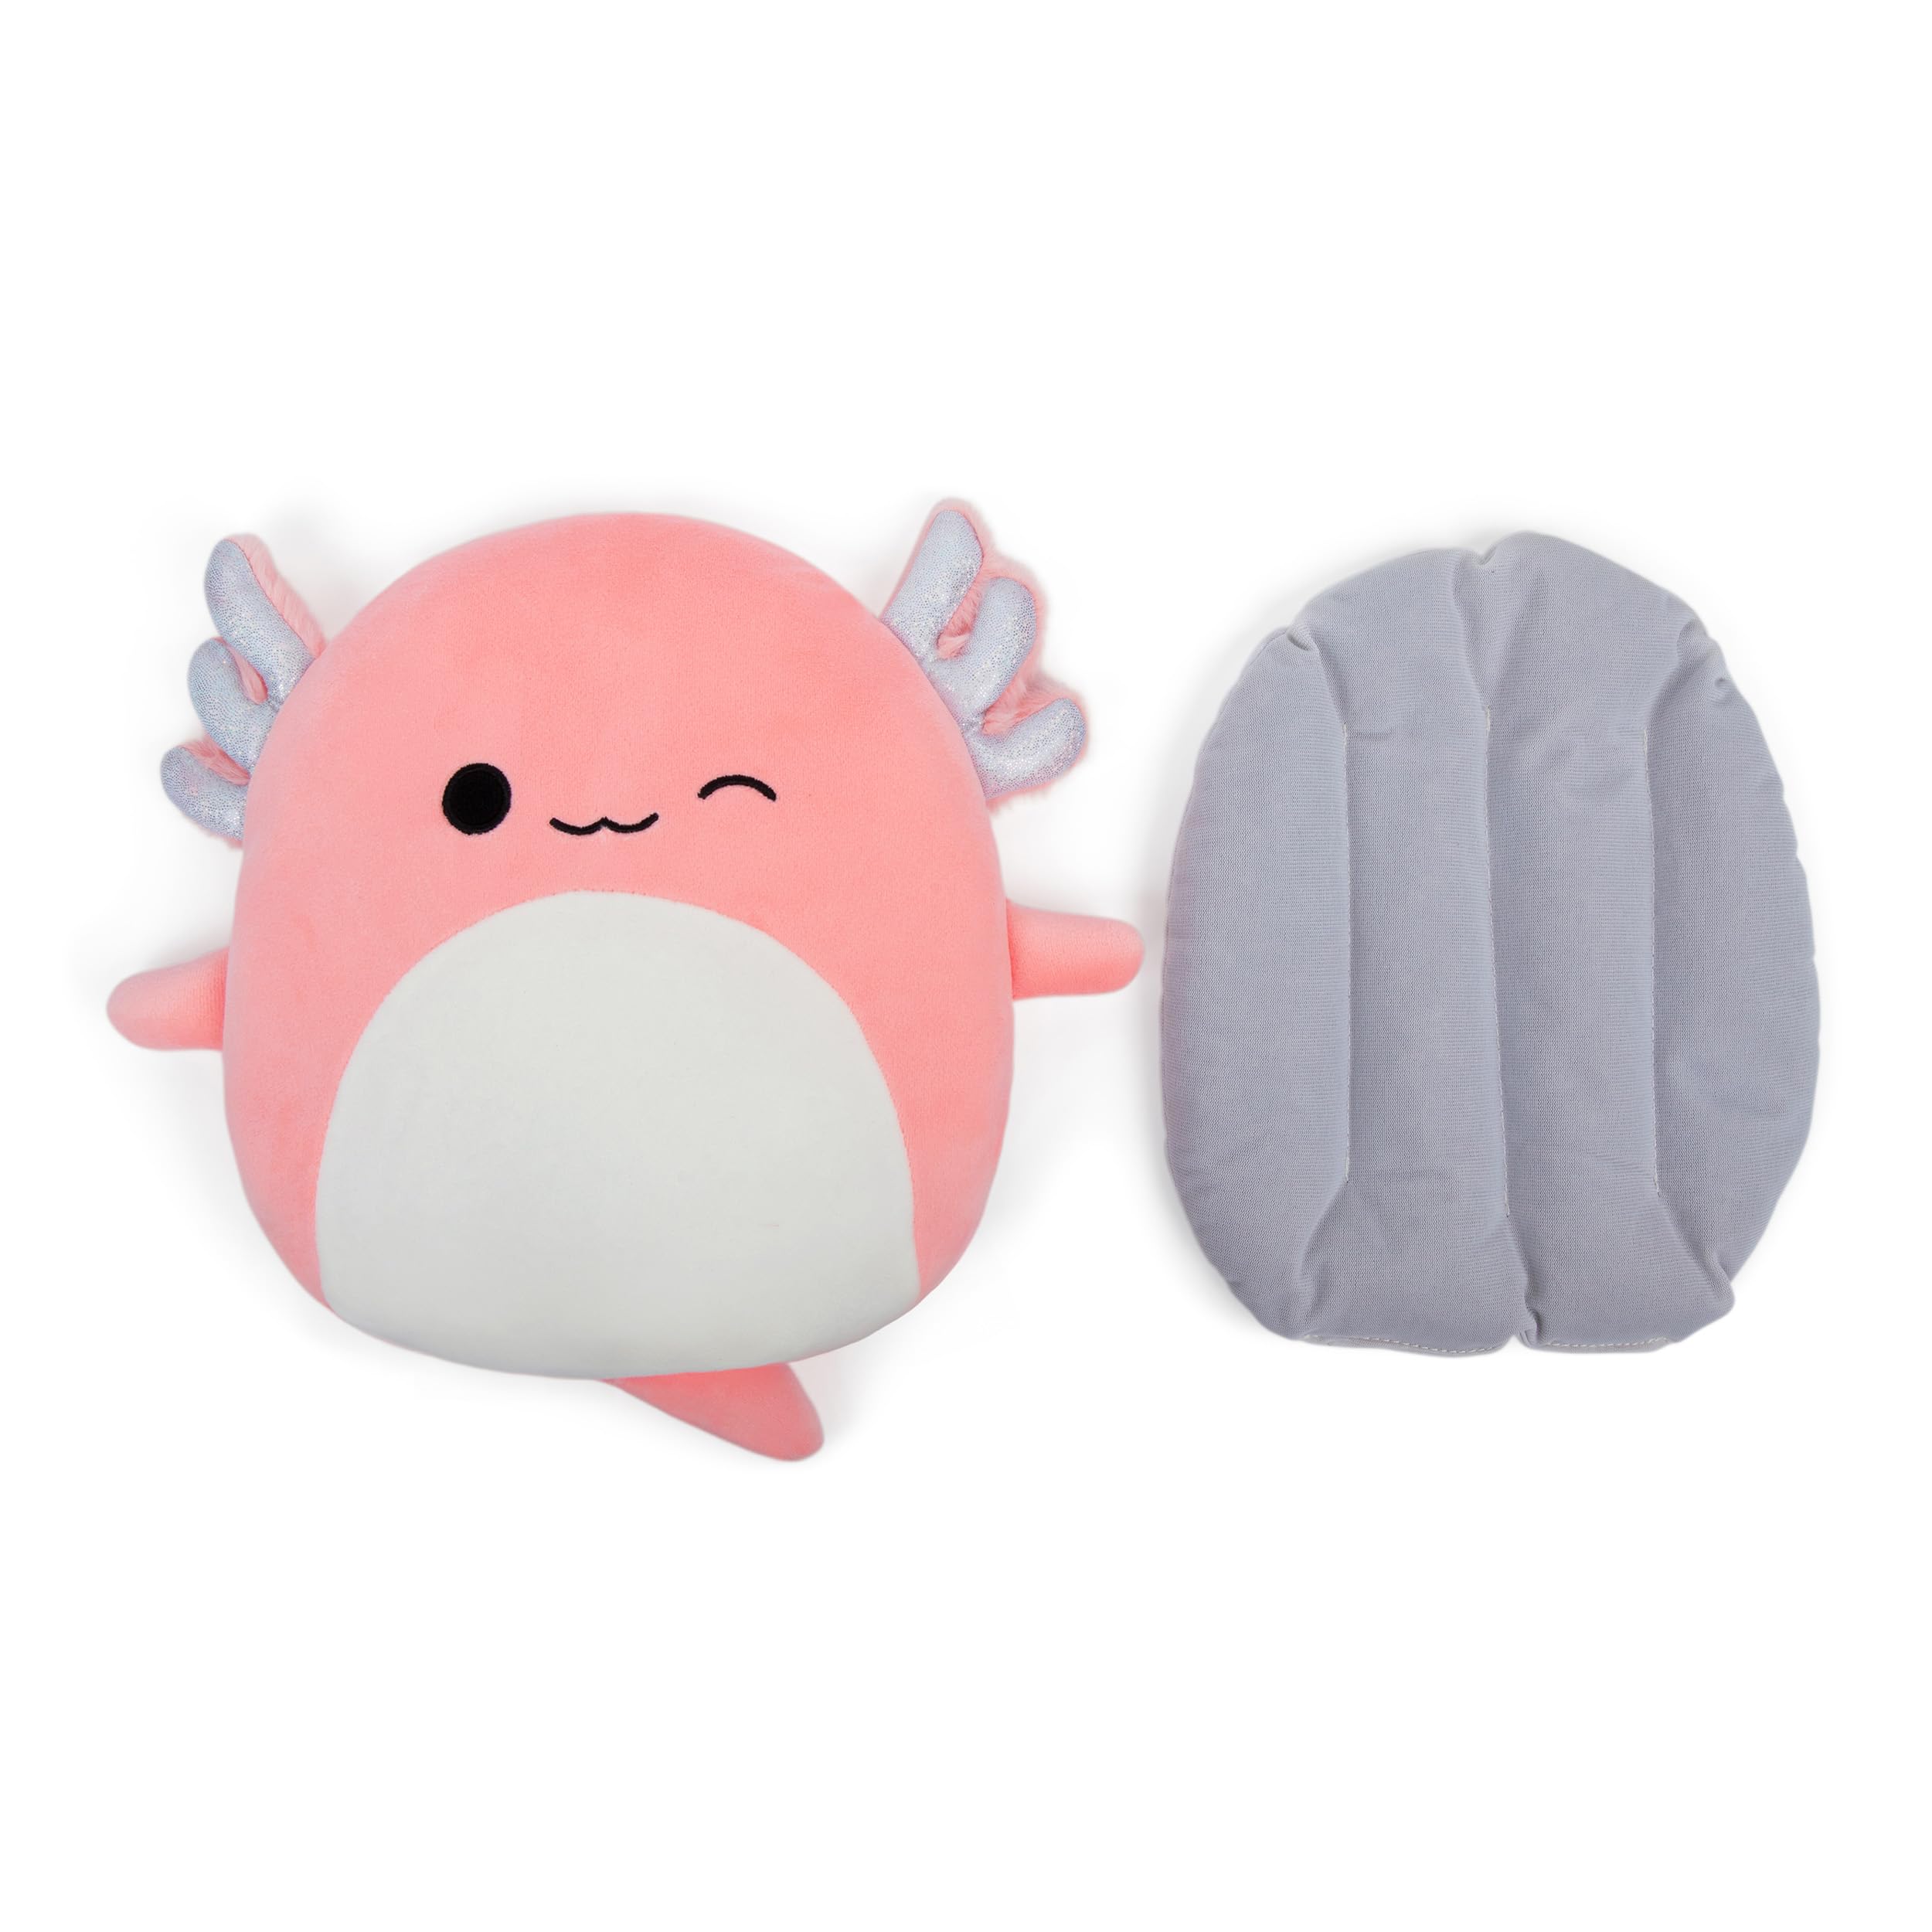 Squishmallows Archie The Axolotl Heating Pad - Heating Pad for Cramps by Relatable®